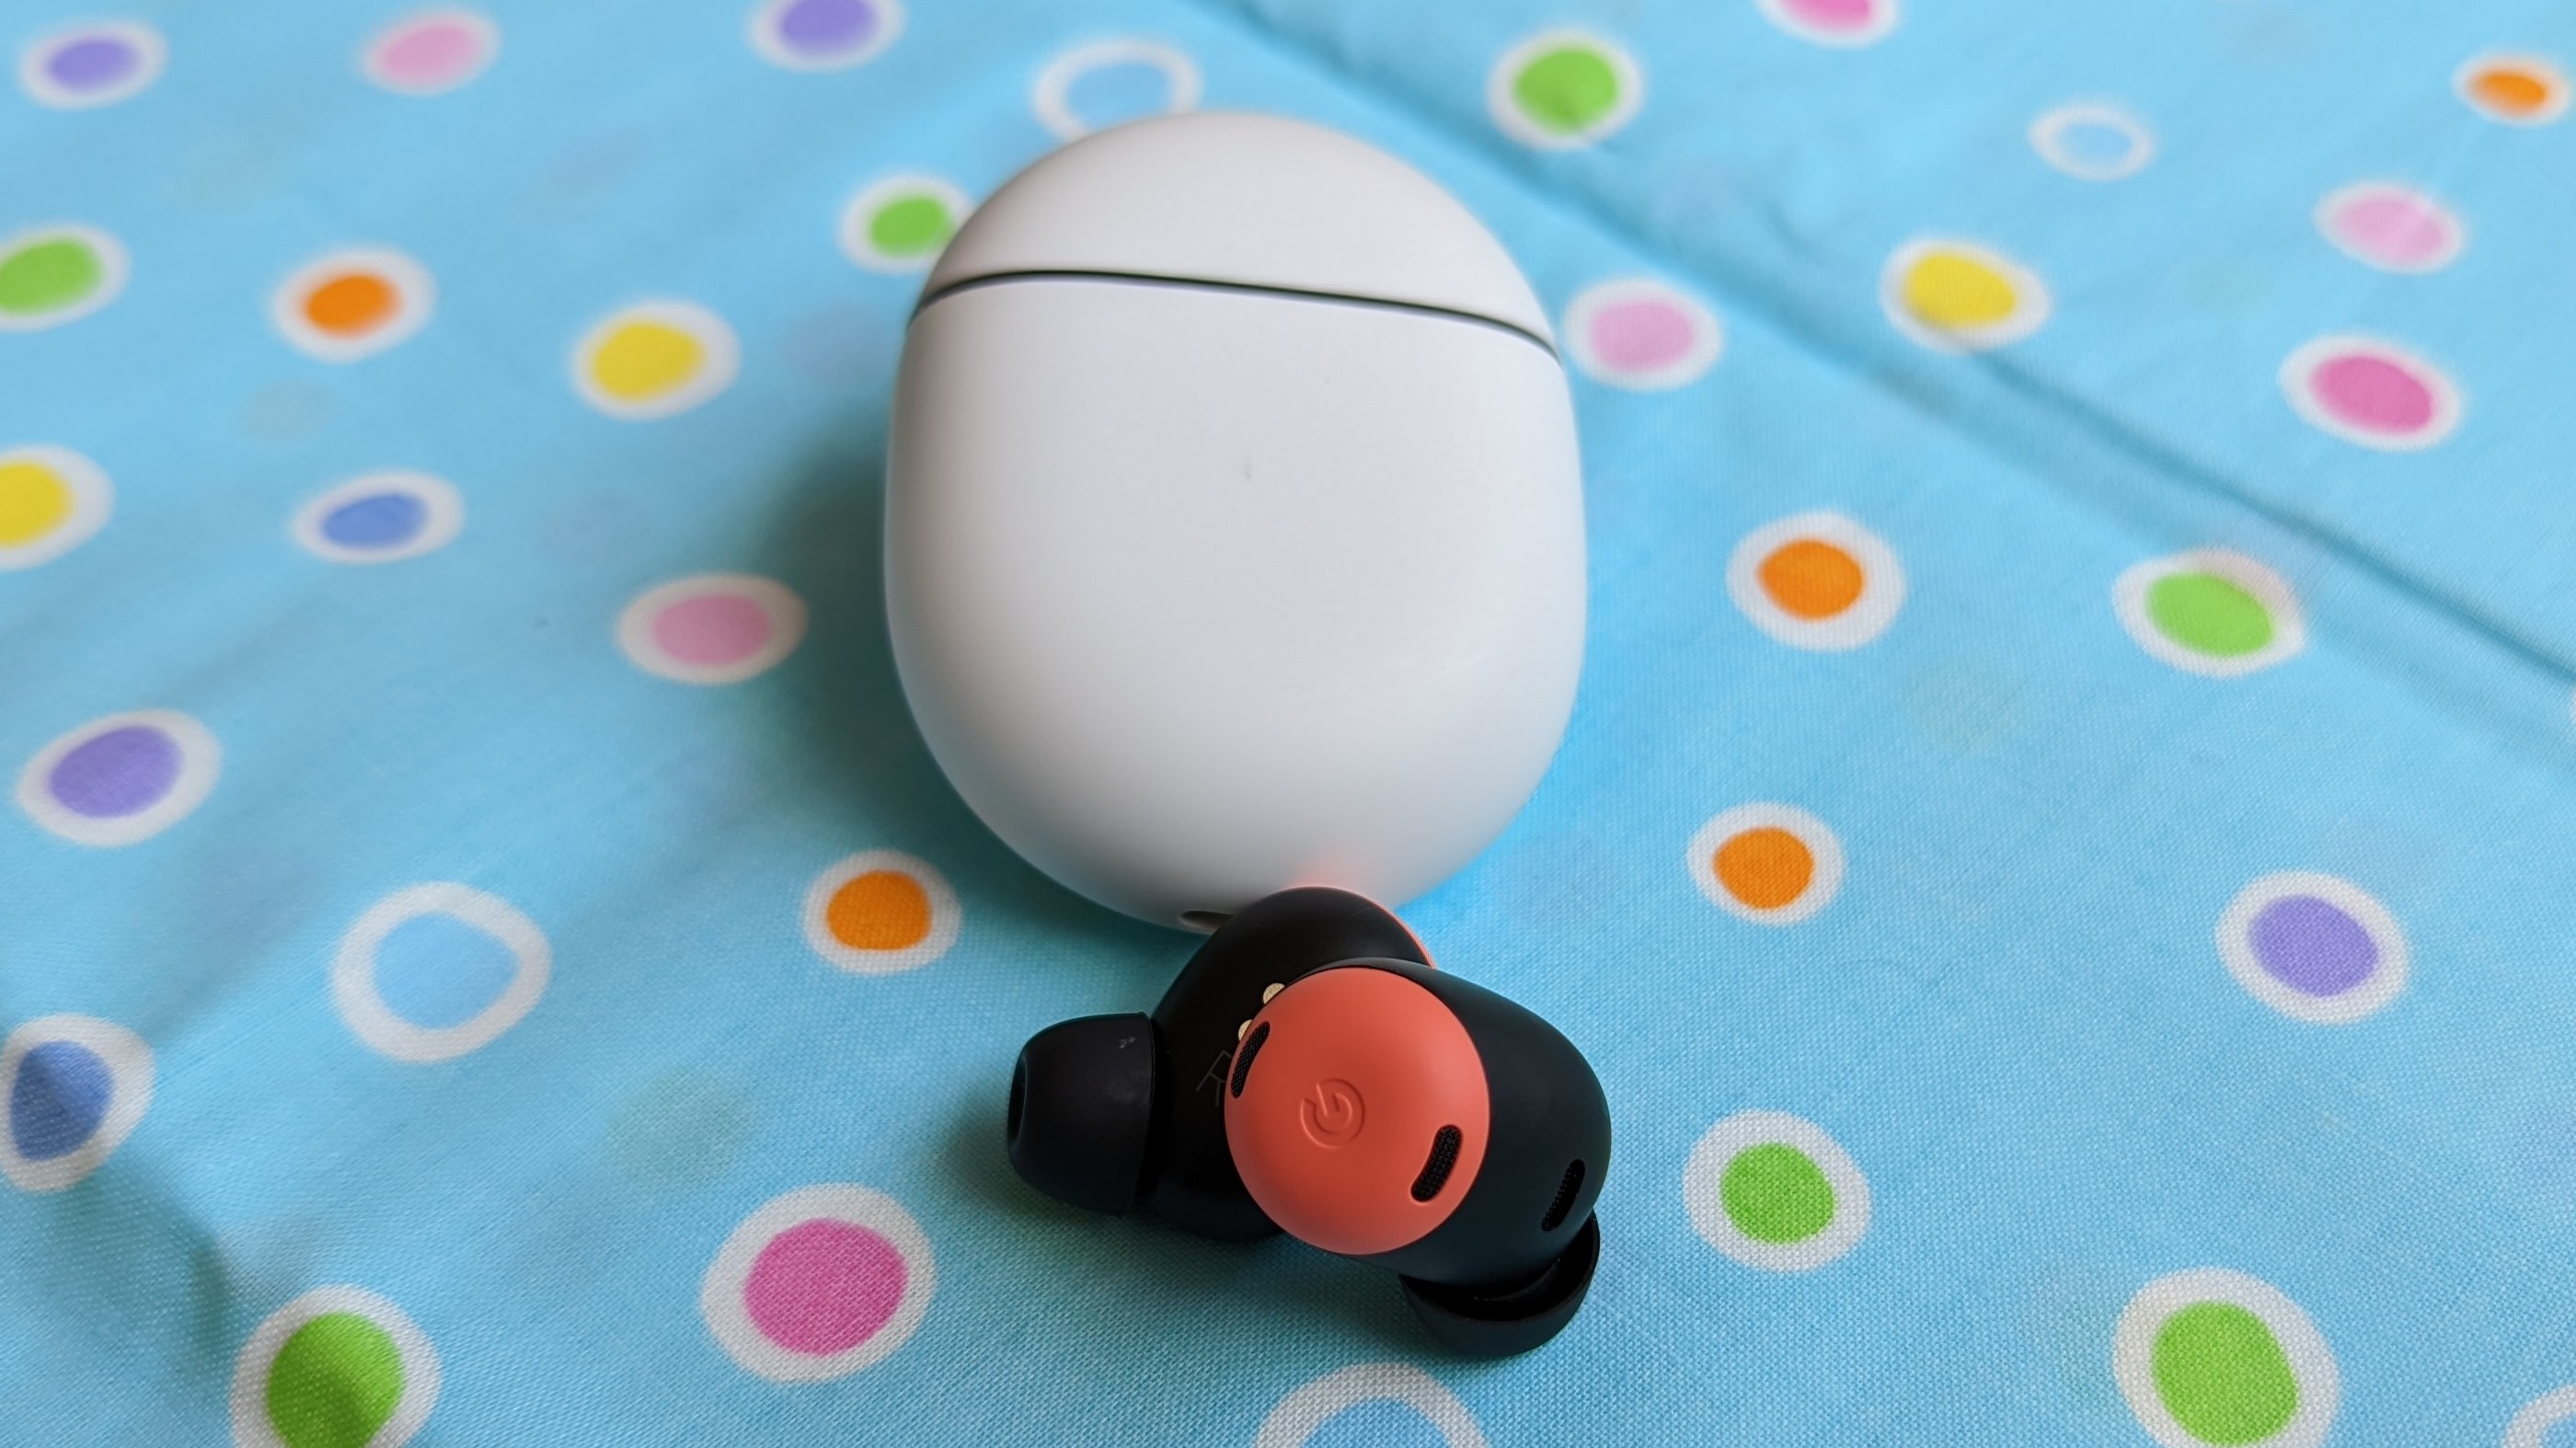 The Google Pixel Buds Pro being displayed atop a polka-dot-designed fabric cloth